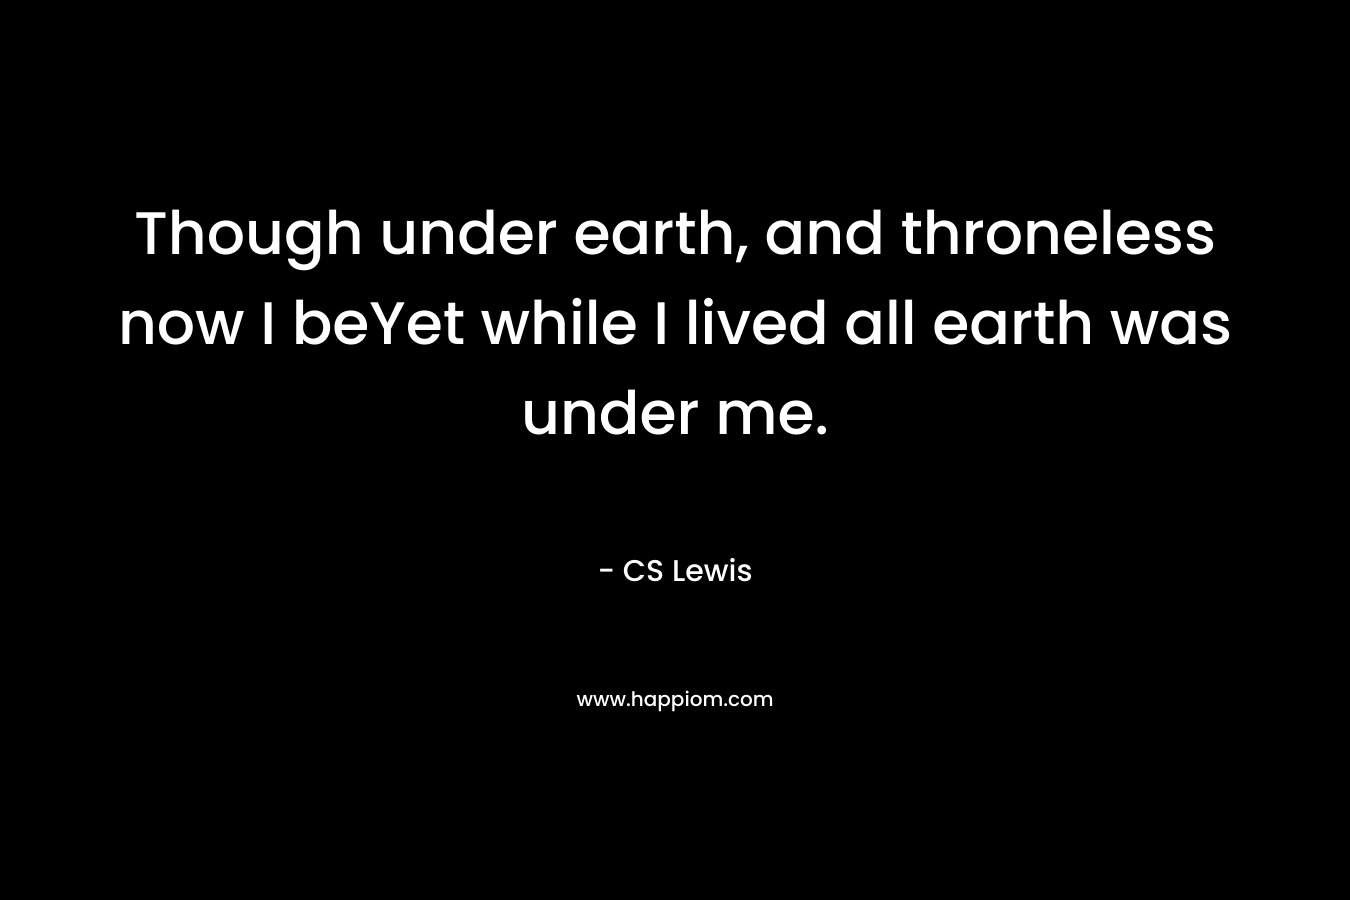 Though under earth, and throneless now I beYet while I lived all earth was under me.